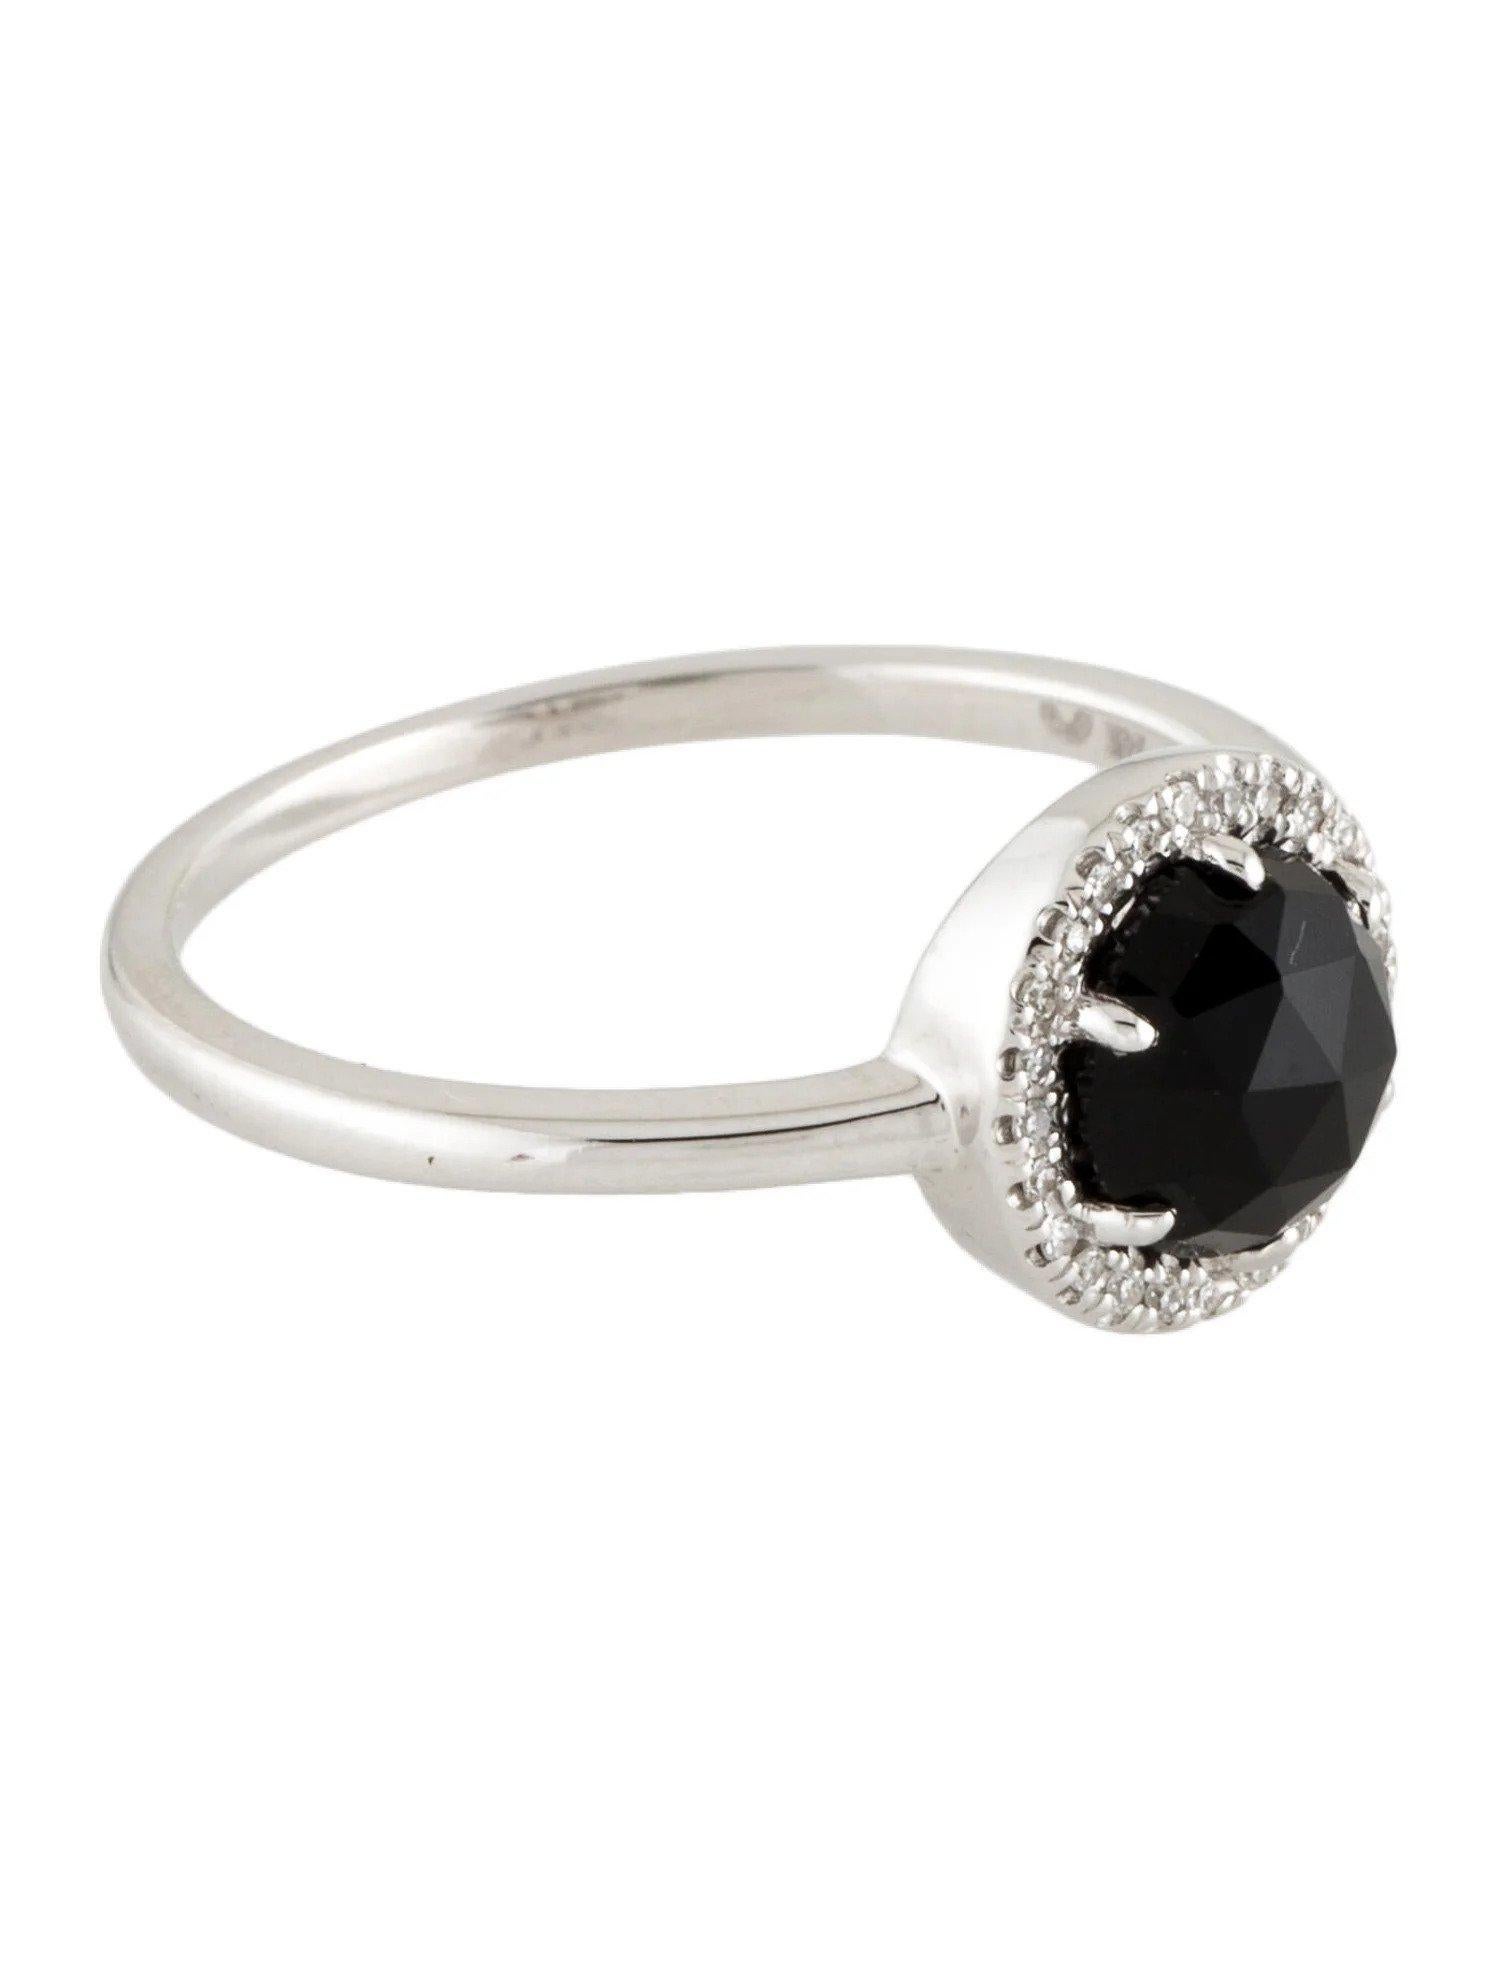 1.09 Carat Round Black Onyx & Diamond White Gold Ring In New Condition For Sale In Great Neck, NY